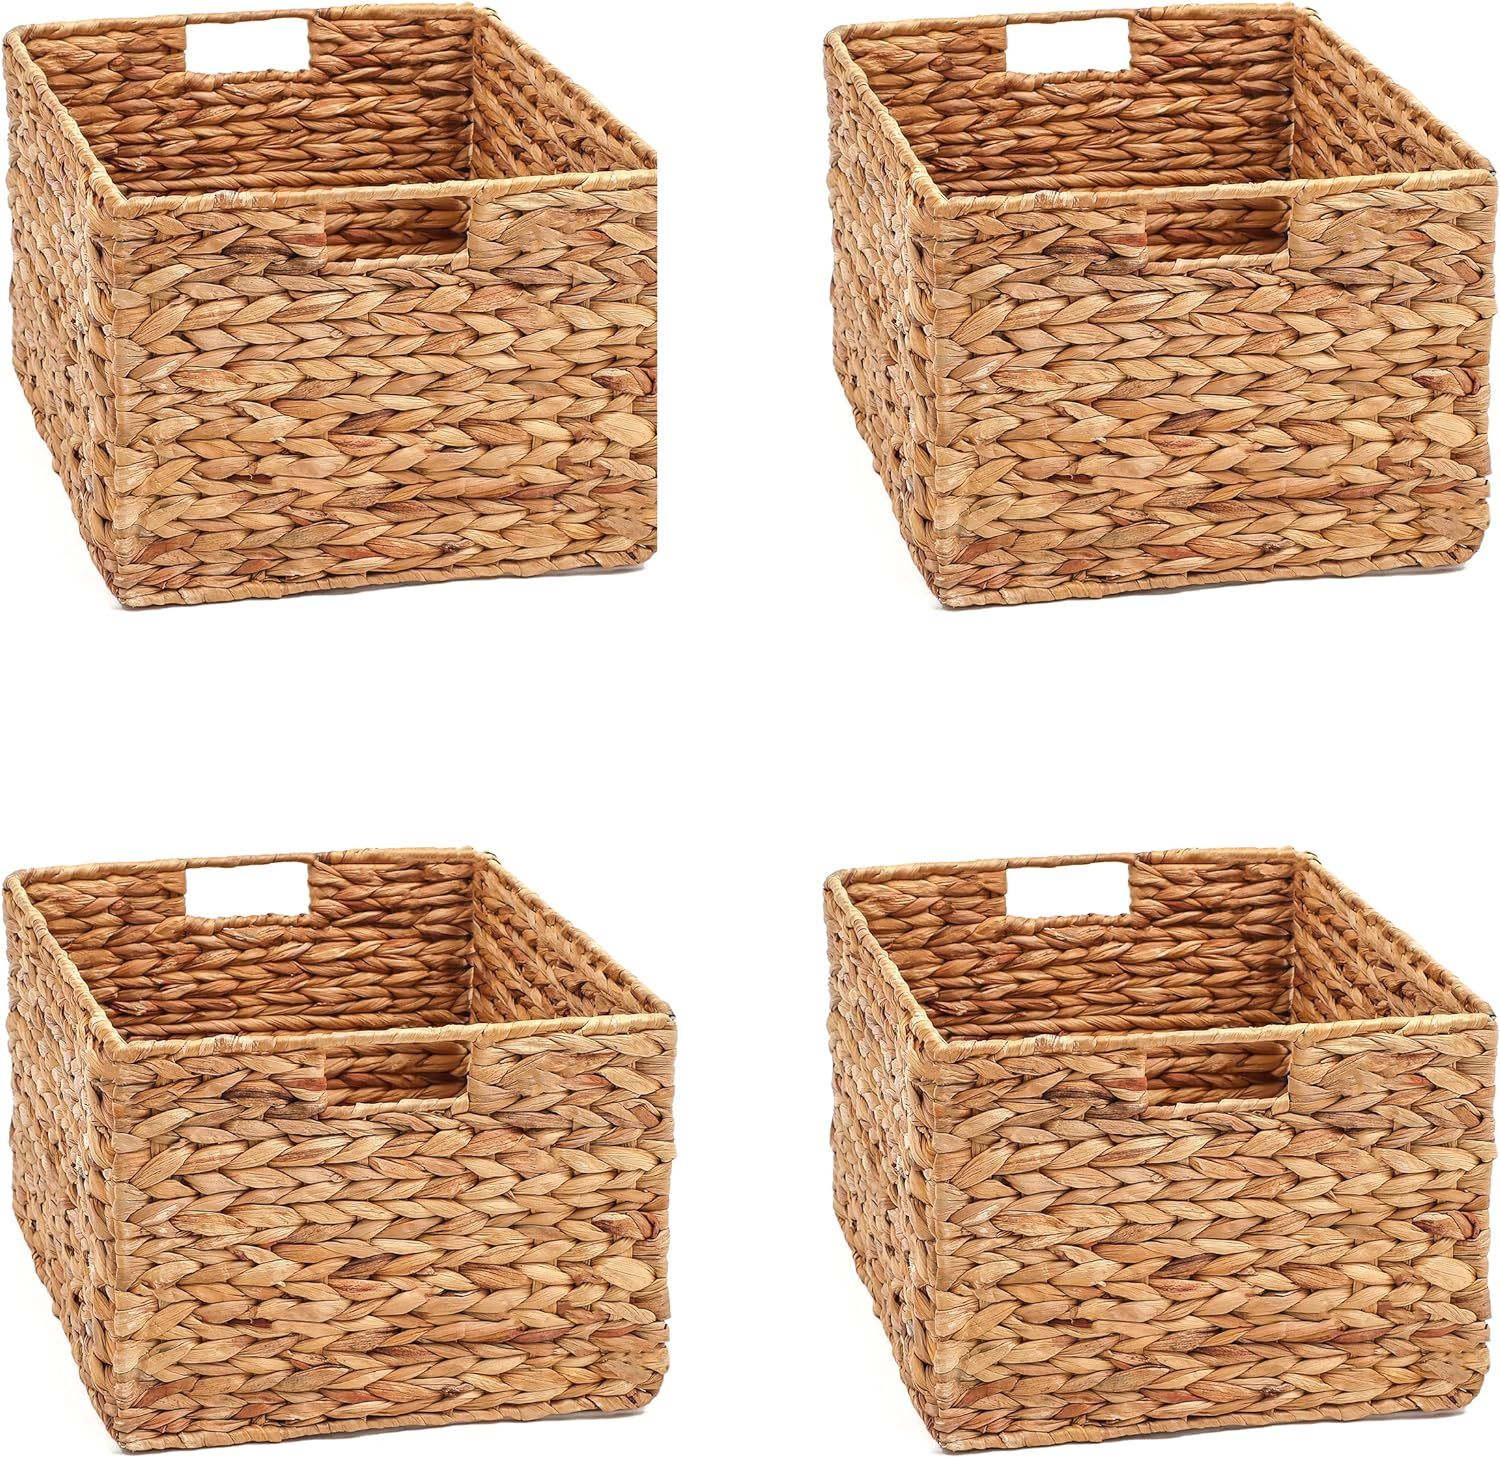 Large Foldable Rectangle Woven Wicker Basket Bins for Storage by Trademark Innovations (Set of 4) | Amazon (US)